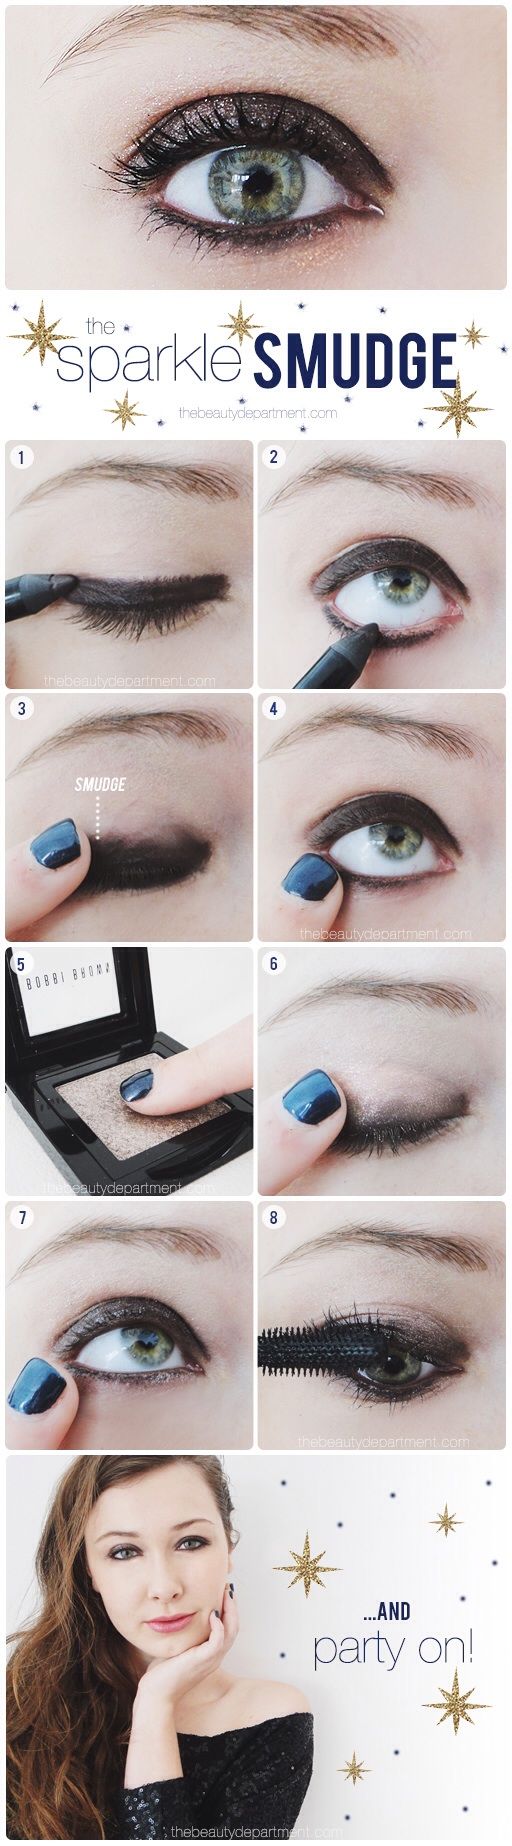 The Hottest Makeup Trends 20 Great Tips, Tricks and Tutorials (5)